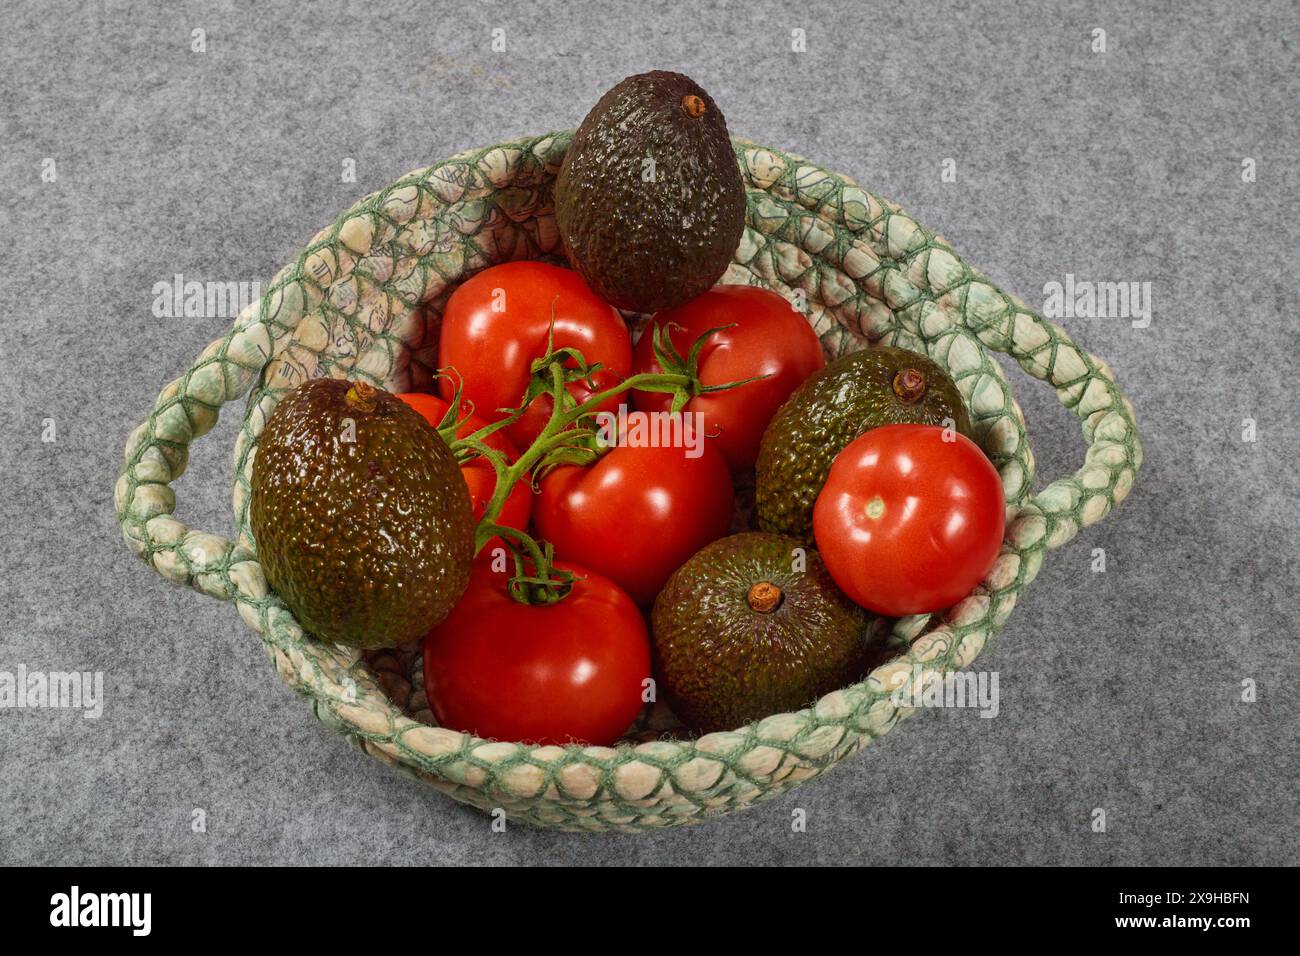 Organic potassium rich foods, Avocados, Bananas and Tomatoes. Healthy summer foods in a linen basket!!! Stock Photo